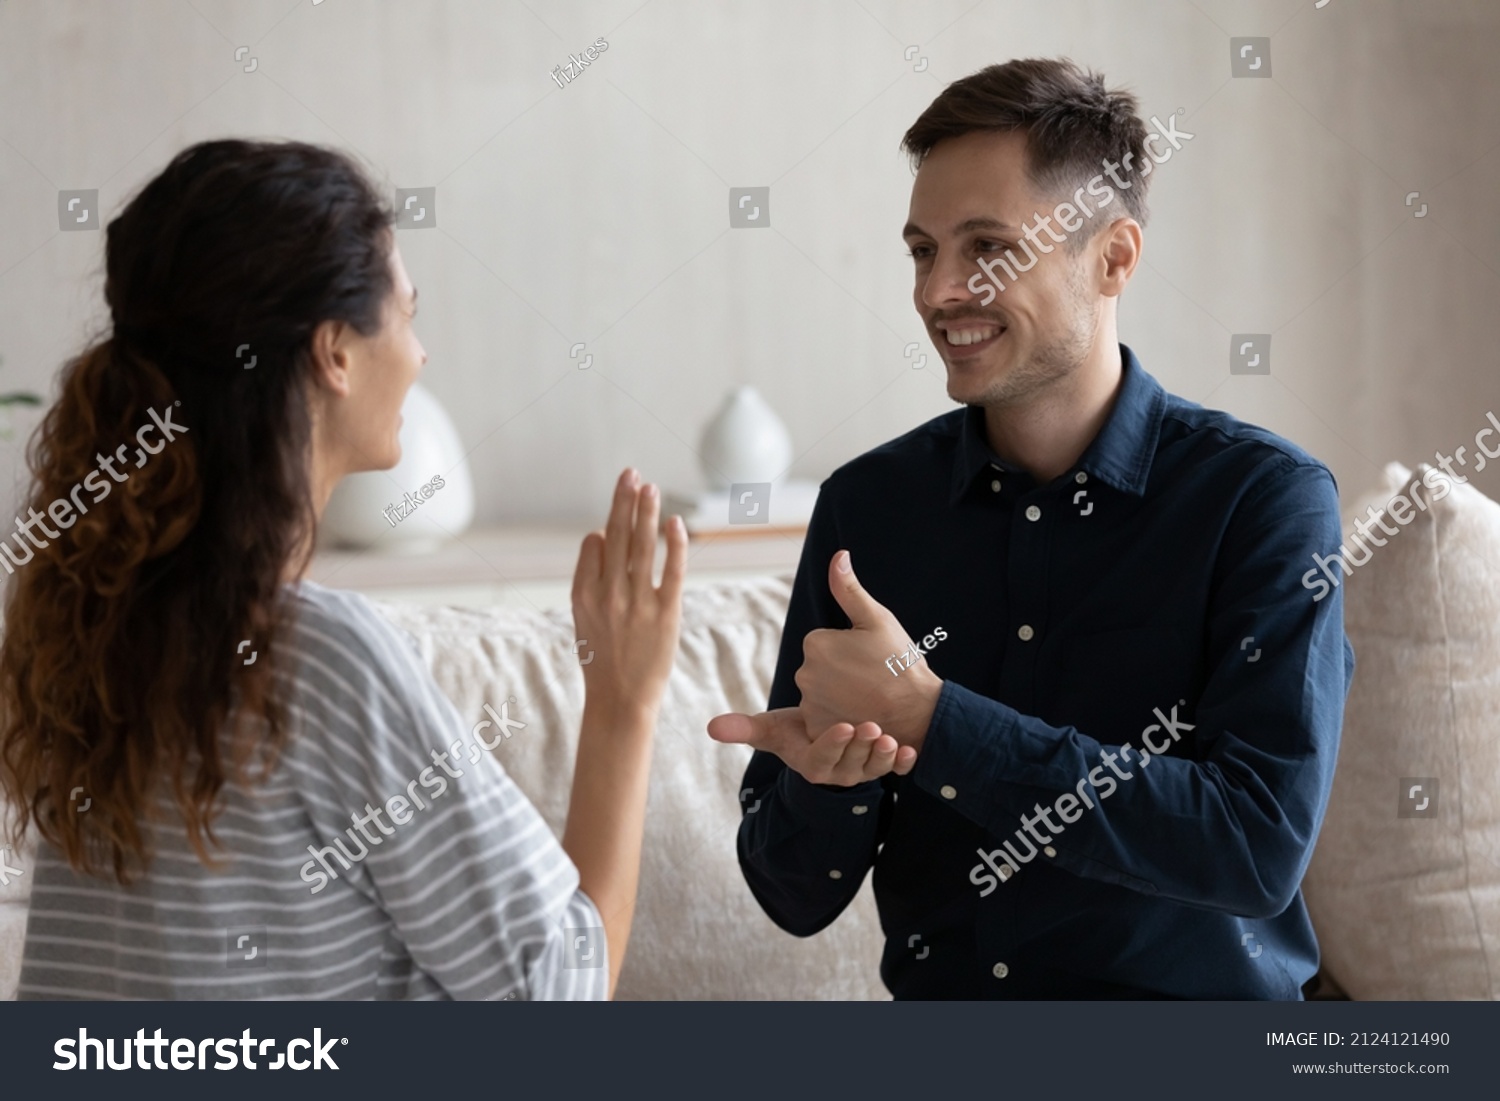 Smiling man and woman with deafness using signs for communication, sitting on couch at home, smiling. Therapist teaching gesture language to patient with disability. Hearing disorder concept #2124121490